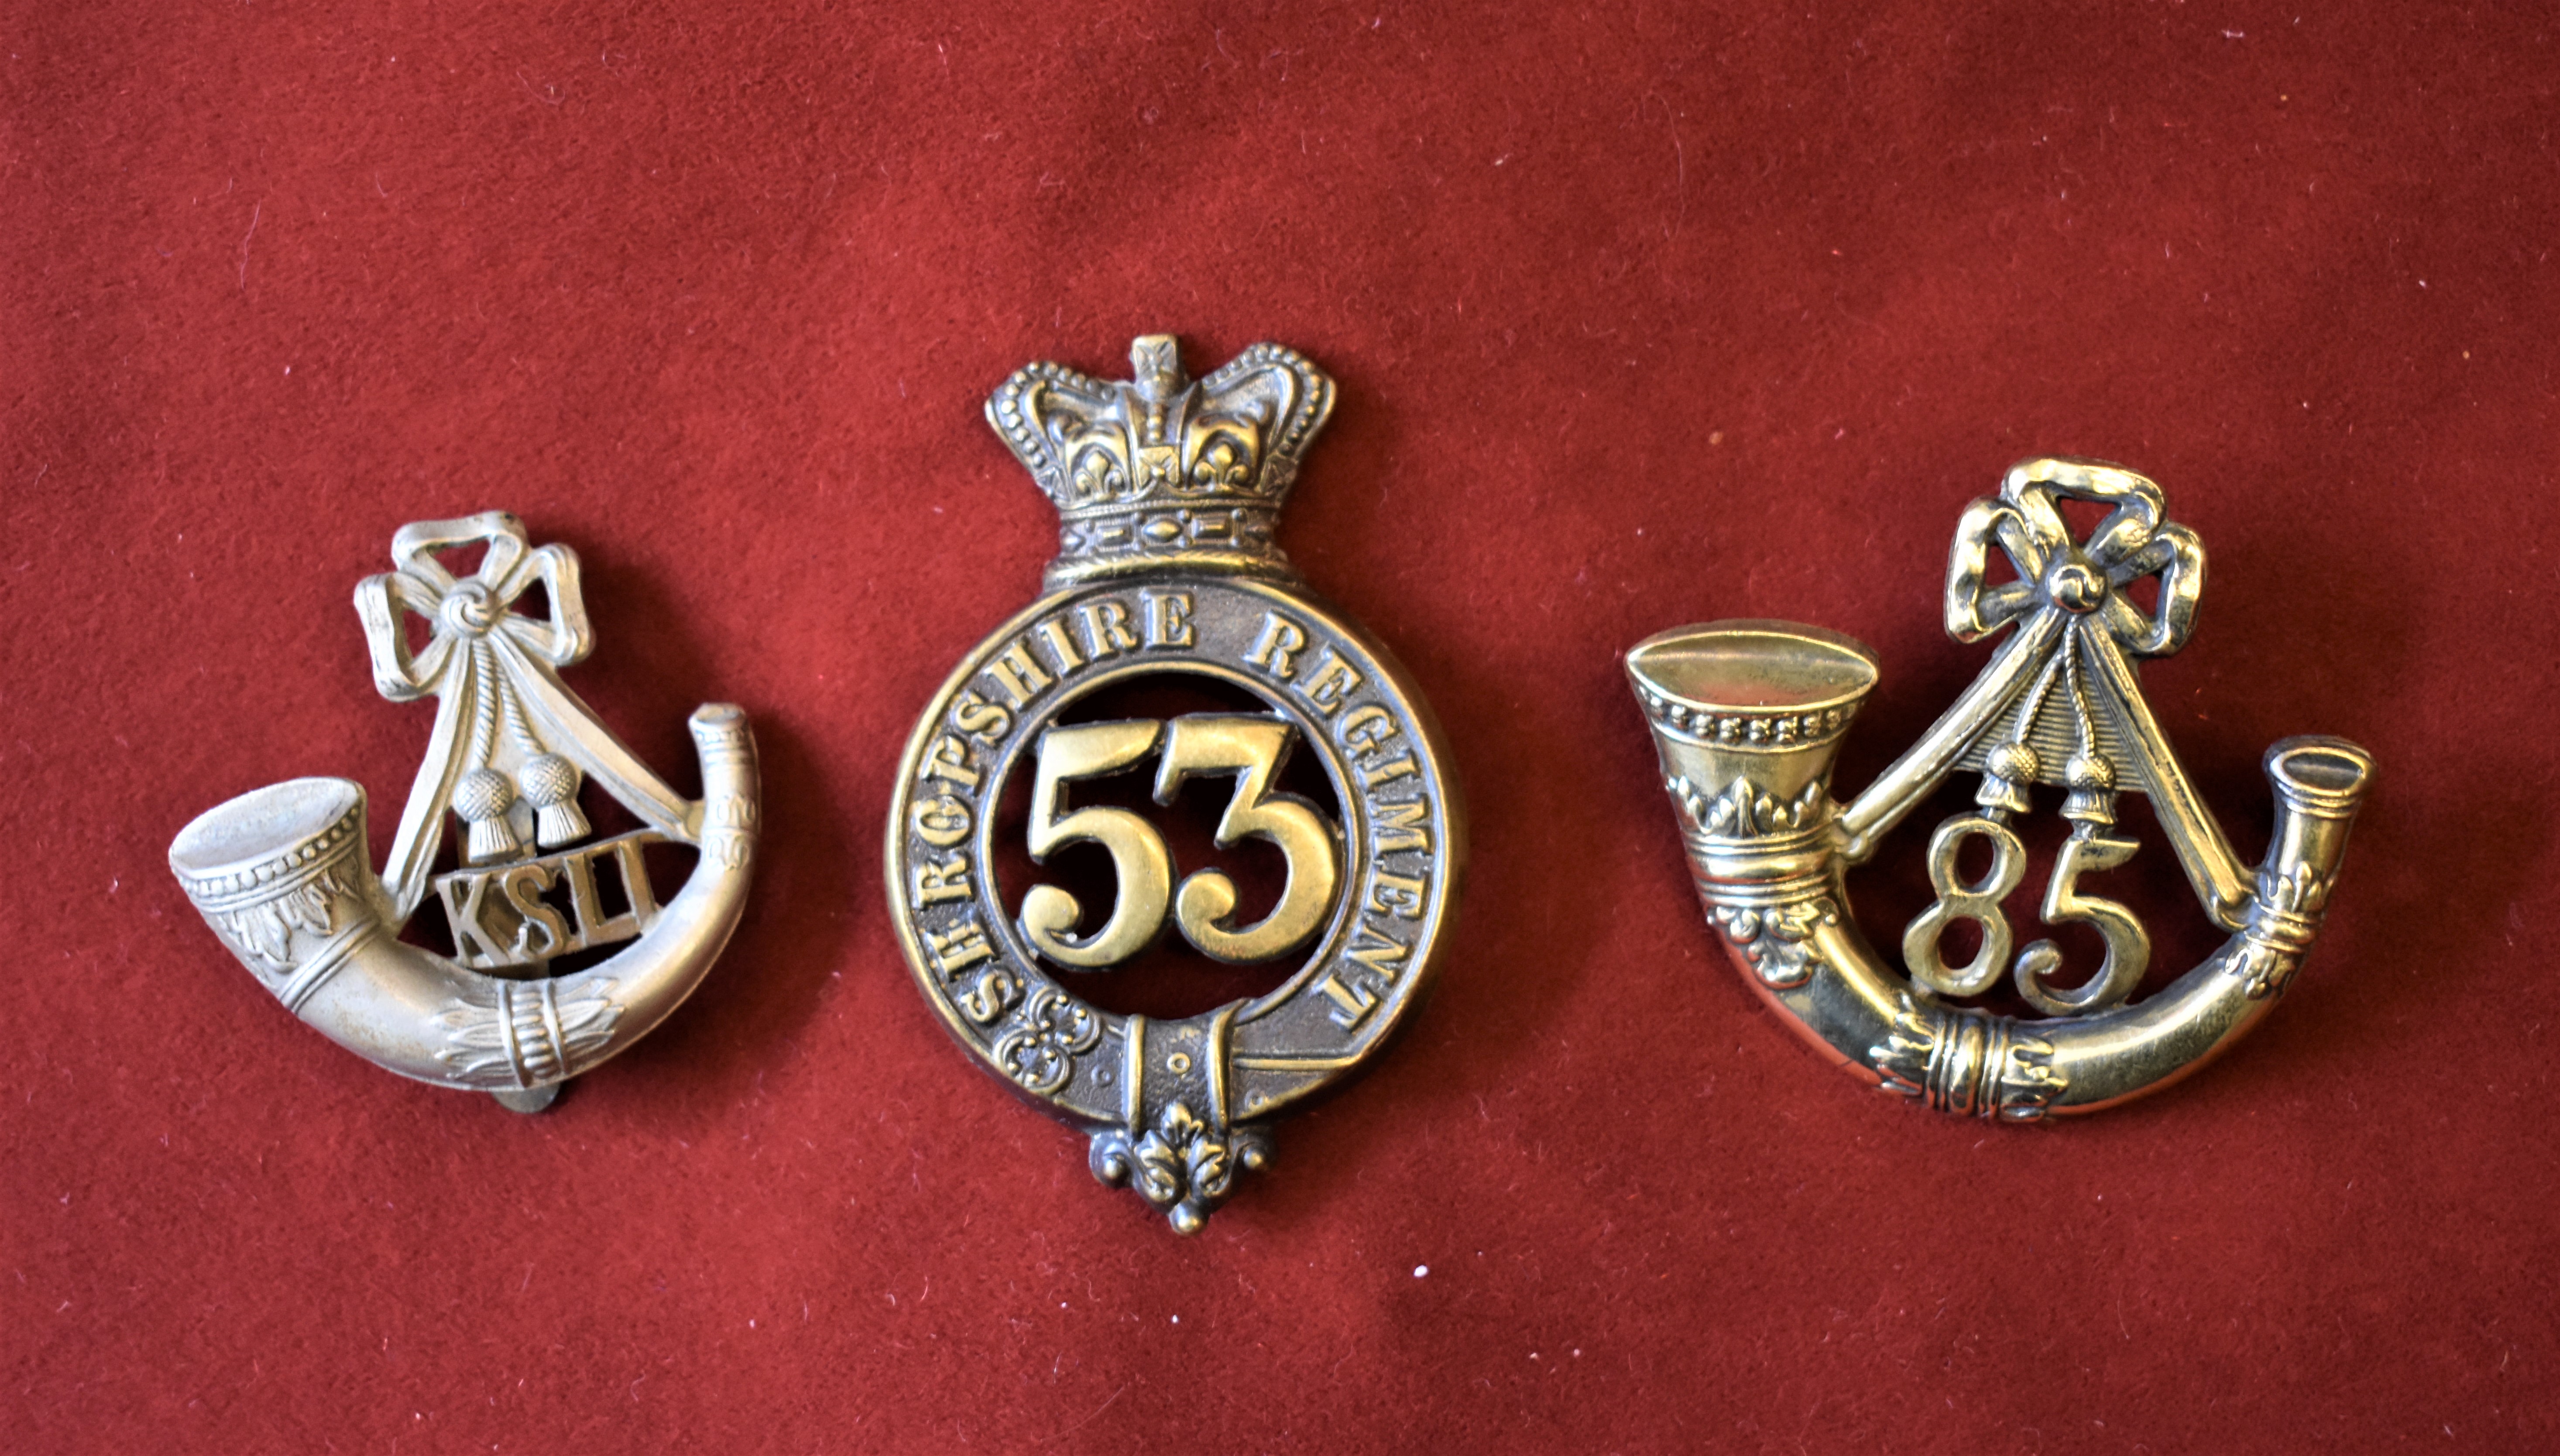 53rd & 85th Shropshire Regt and King's Own Shropshire Light Infantry Glengarry Badges and Forage Cap